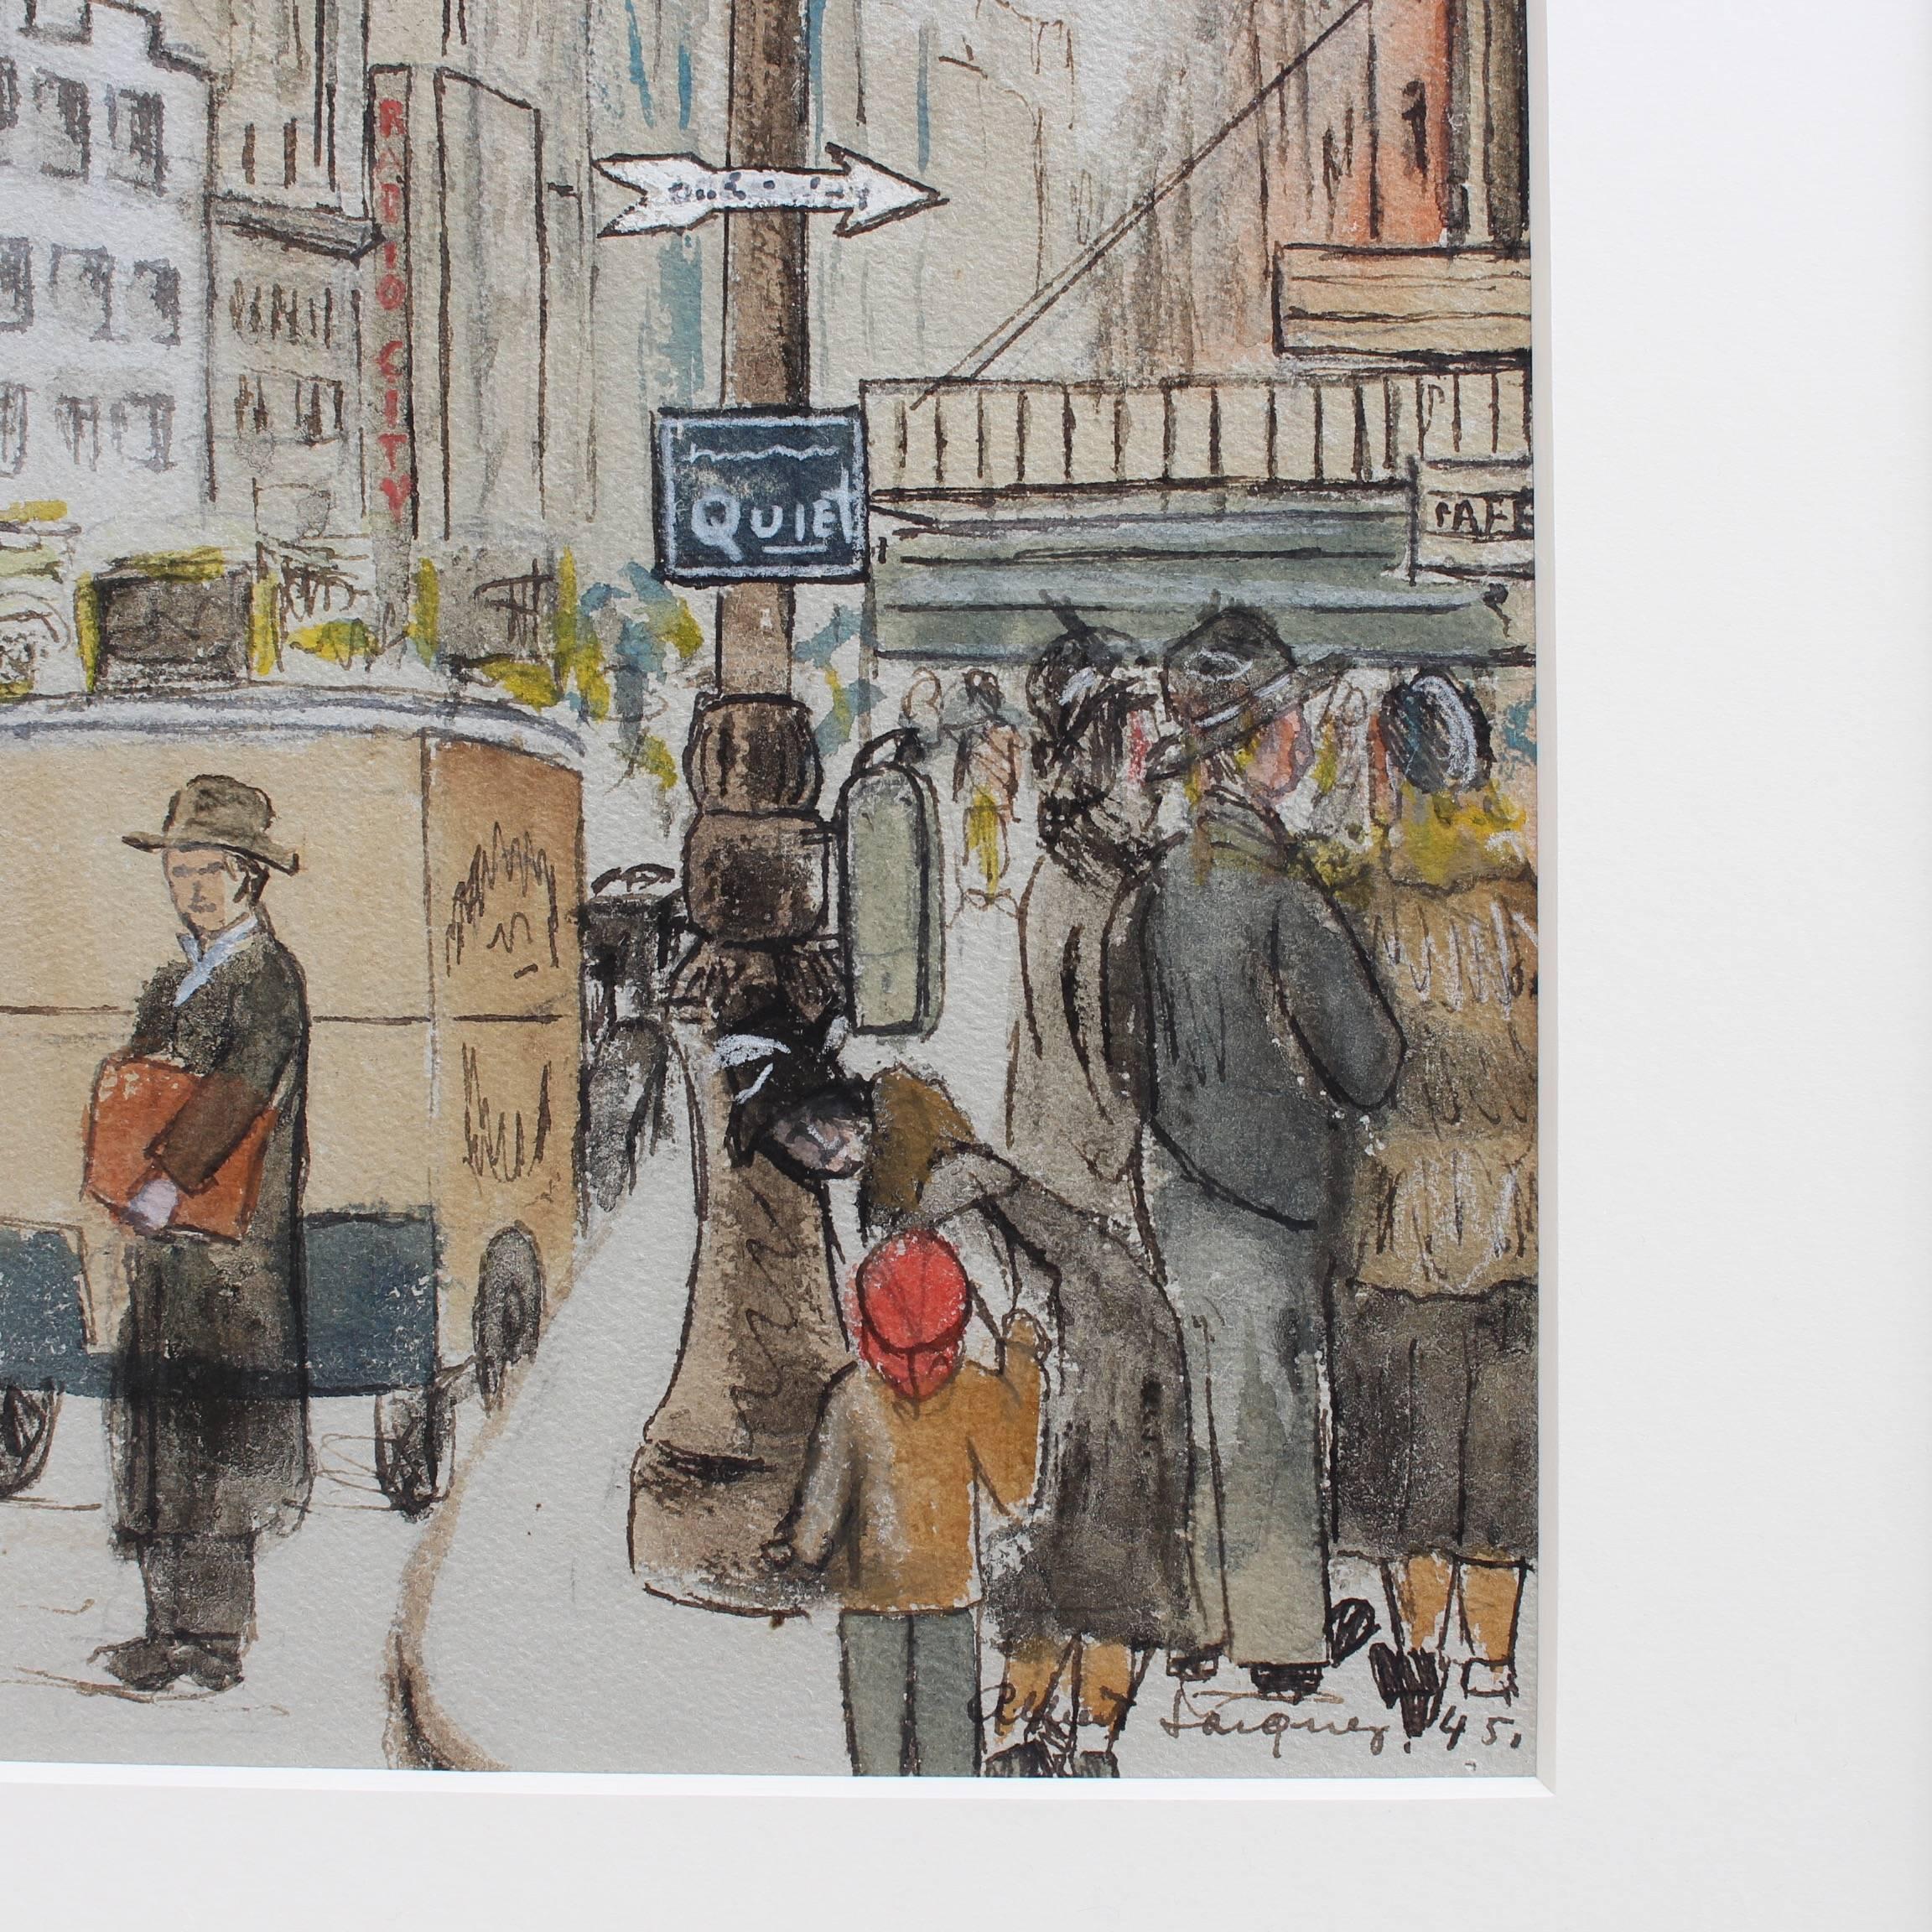 'New York West 55th Street', pen and gouache on fine paper (1945), by Albert Jacquez, (1895 - 1962). A nostalgic image of a very busy New York City corner, W. 55th Street and Avenue of the Americas, dated 1945.

It could almost be today but for the